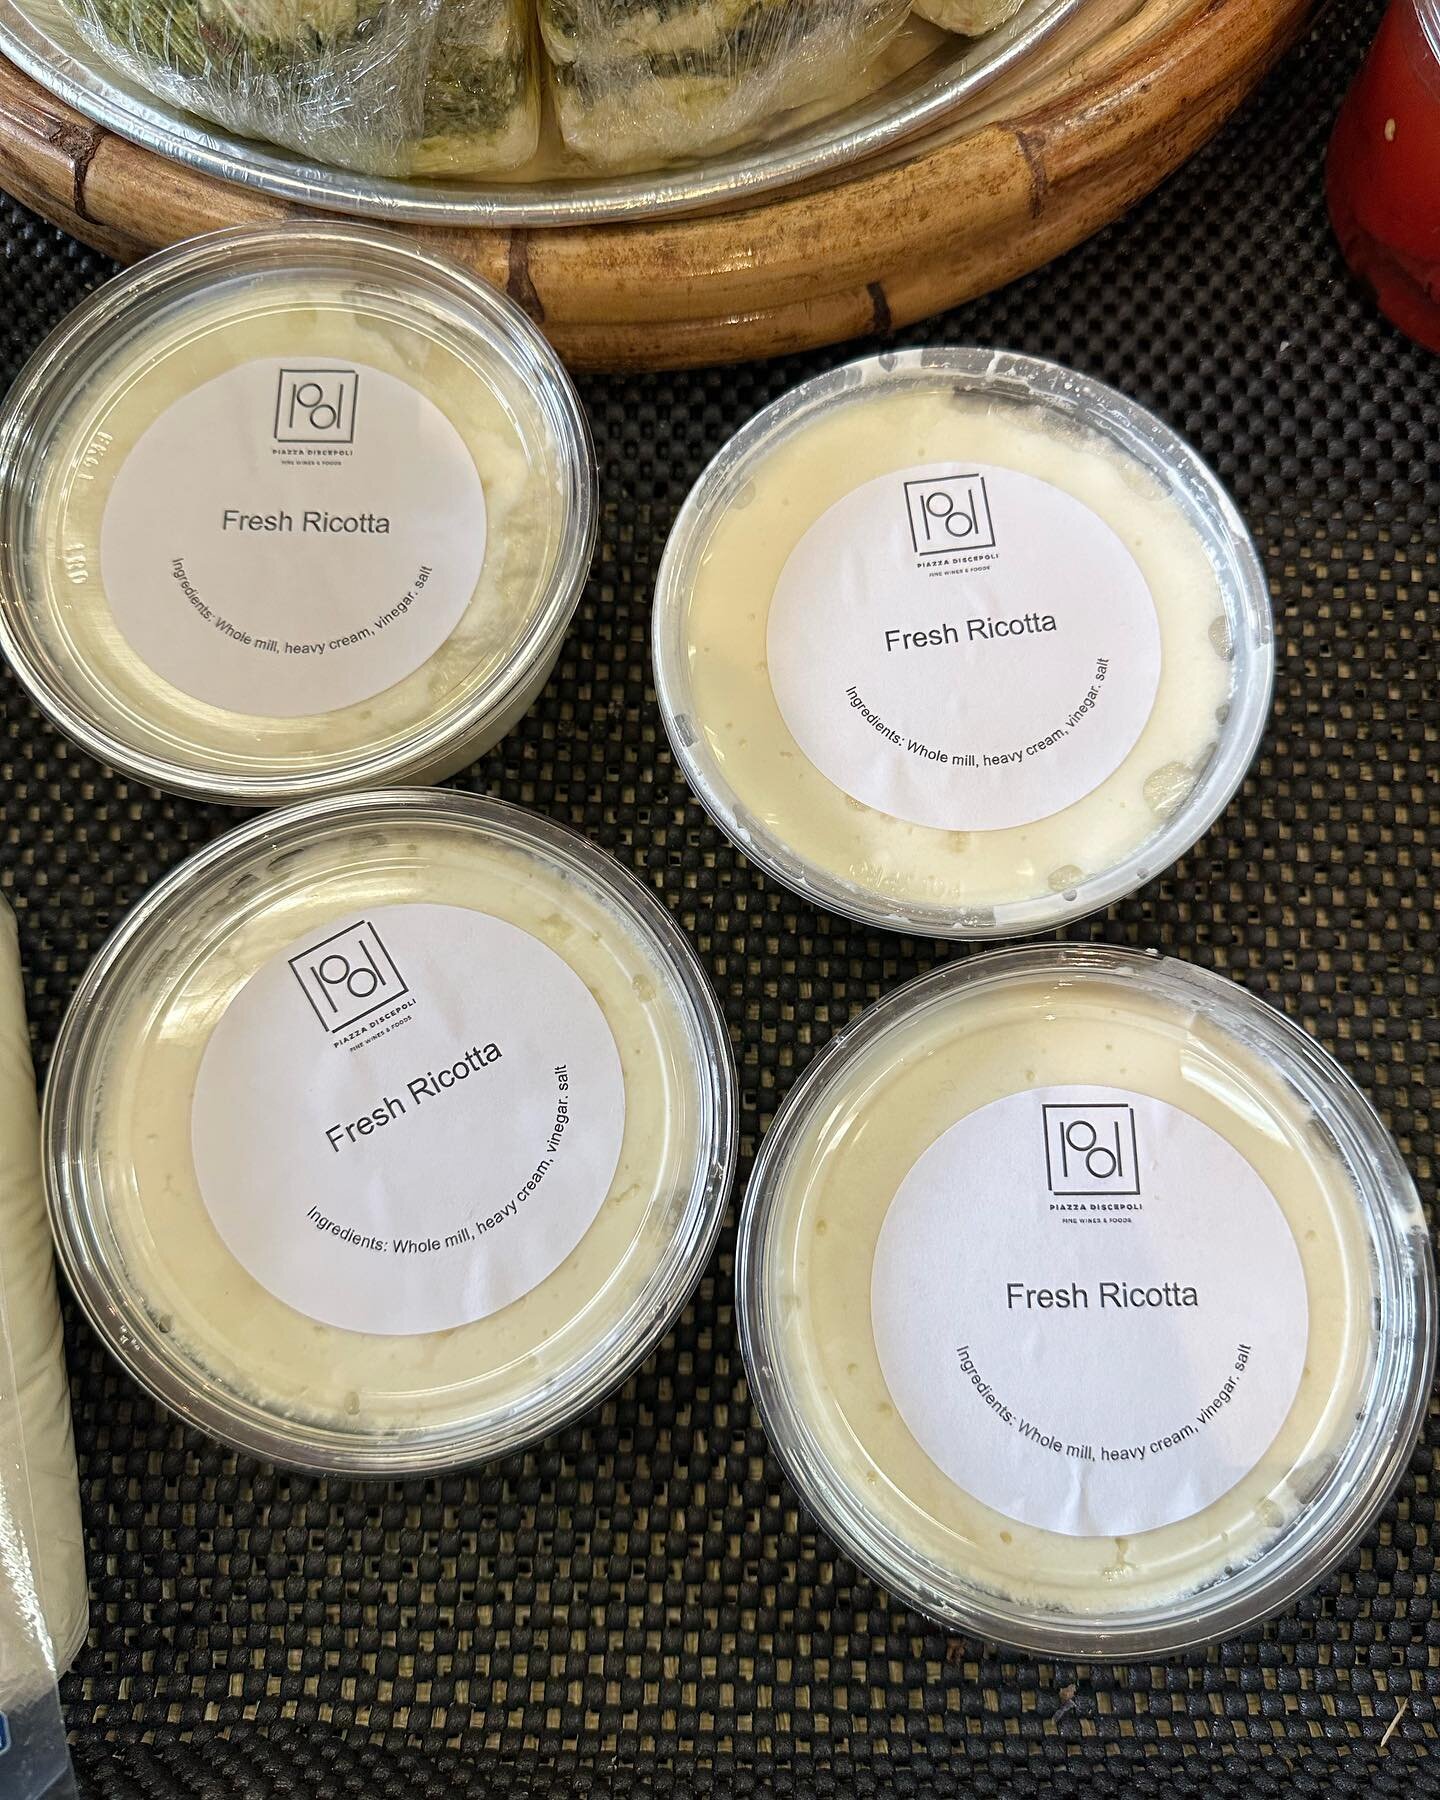 We have fresh, house-made ricotta! Come get yours before it&rsquo;s gone. #cheese #italianfood #local #homemade